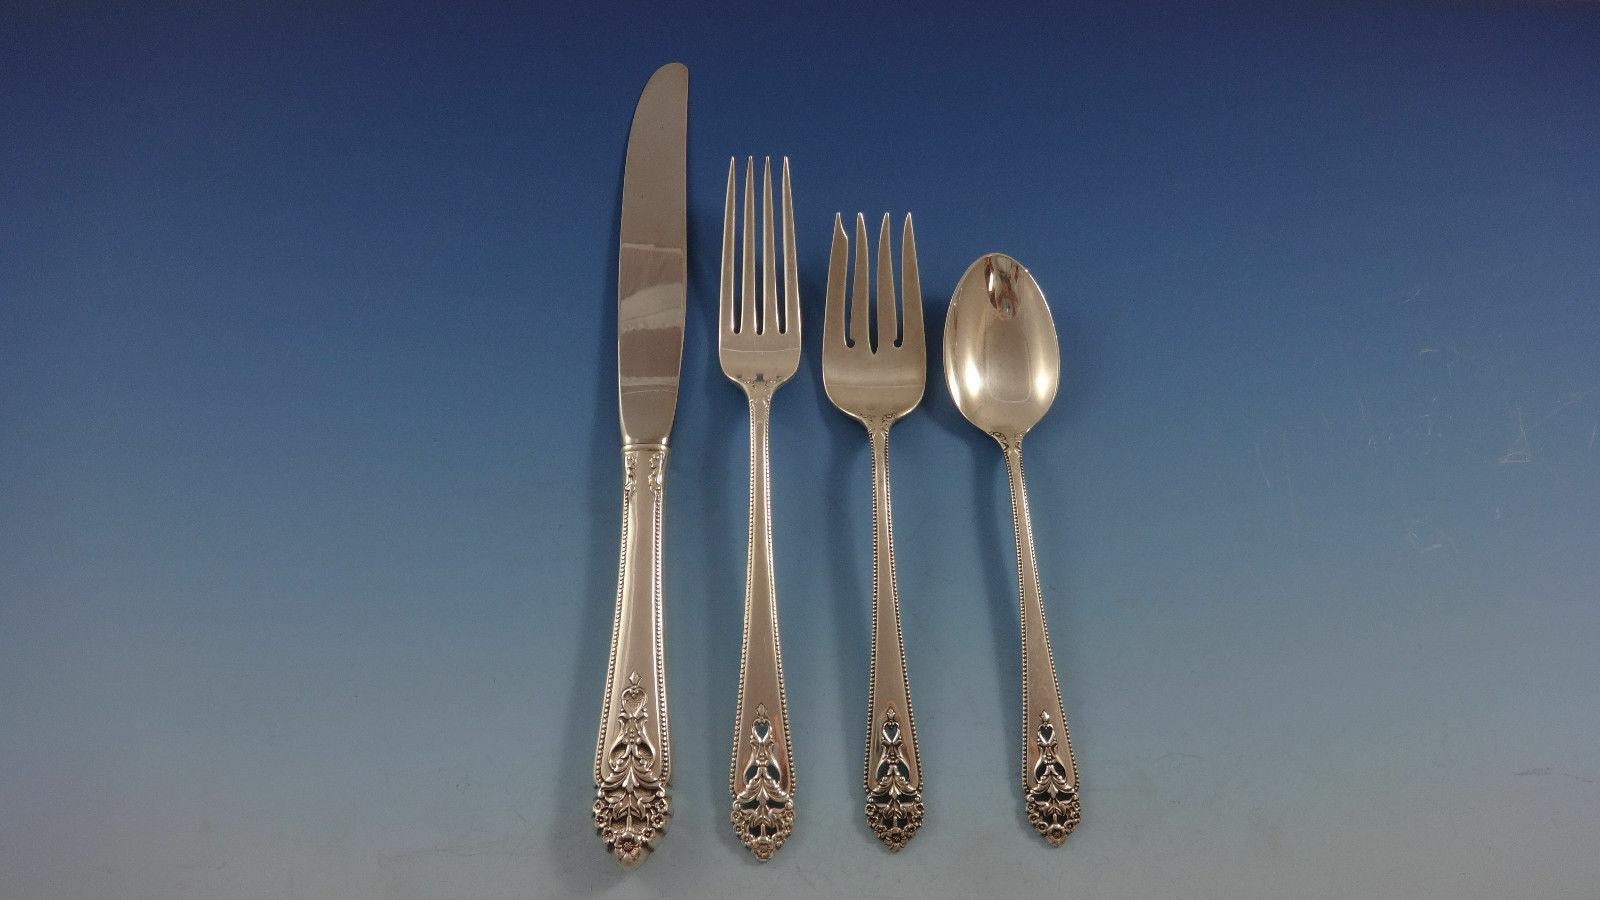 Queen's Lace by International sterling silver flatware set - 55 pieces. This set includes:

12 knives, 9 1/8